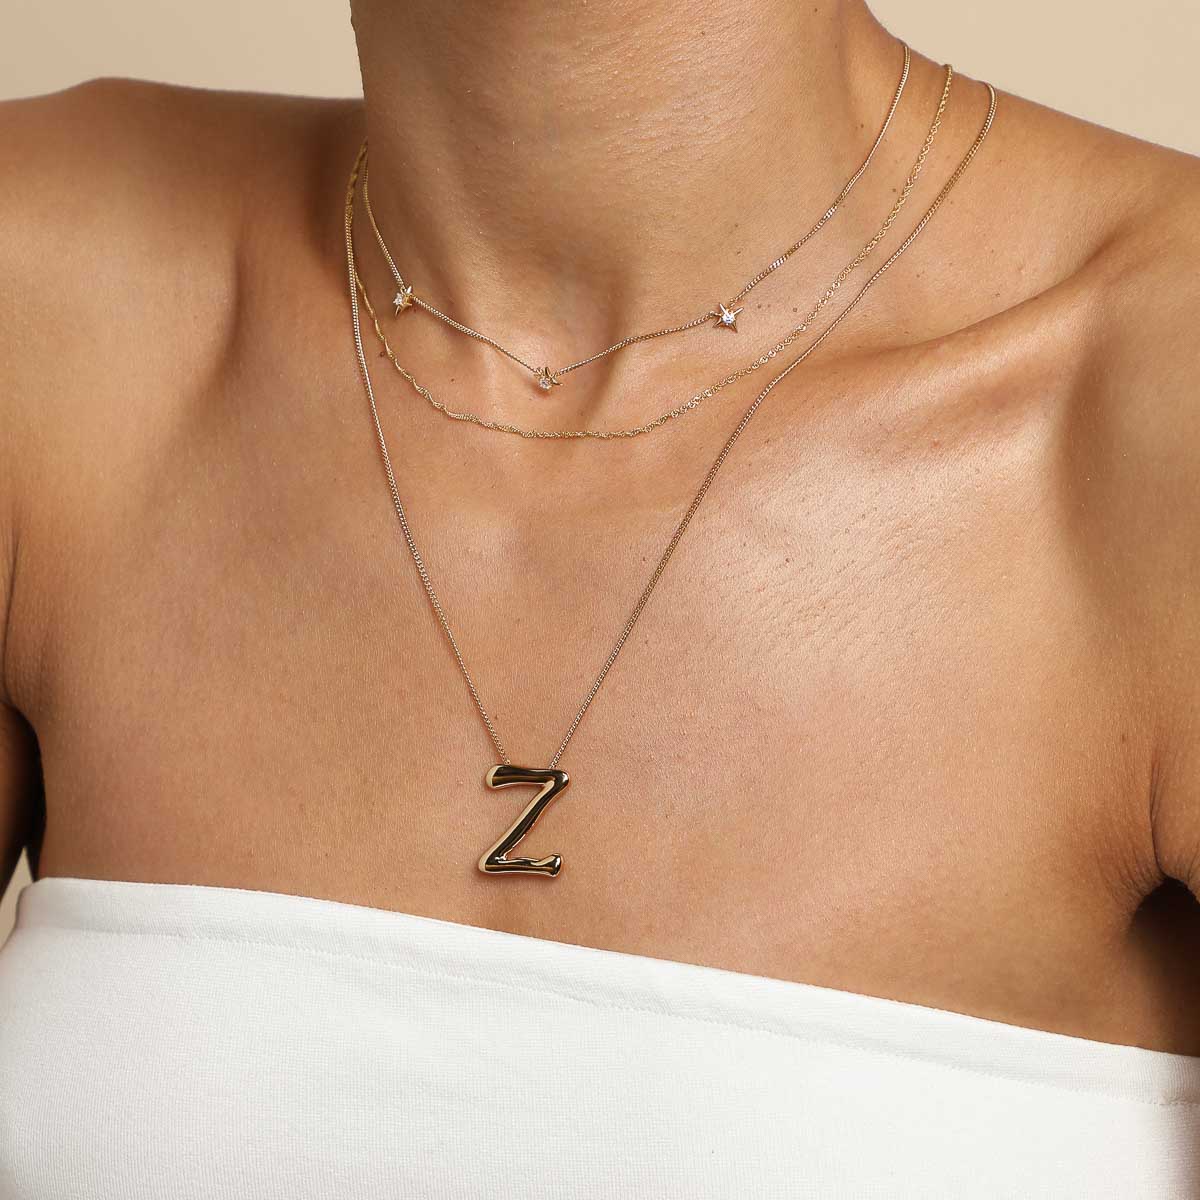 Z Initial Bold Pendant Necklace in Gold